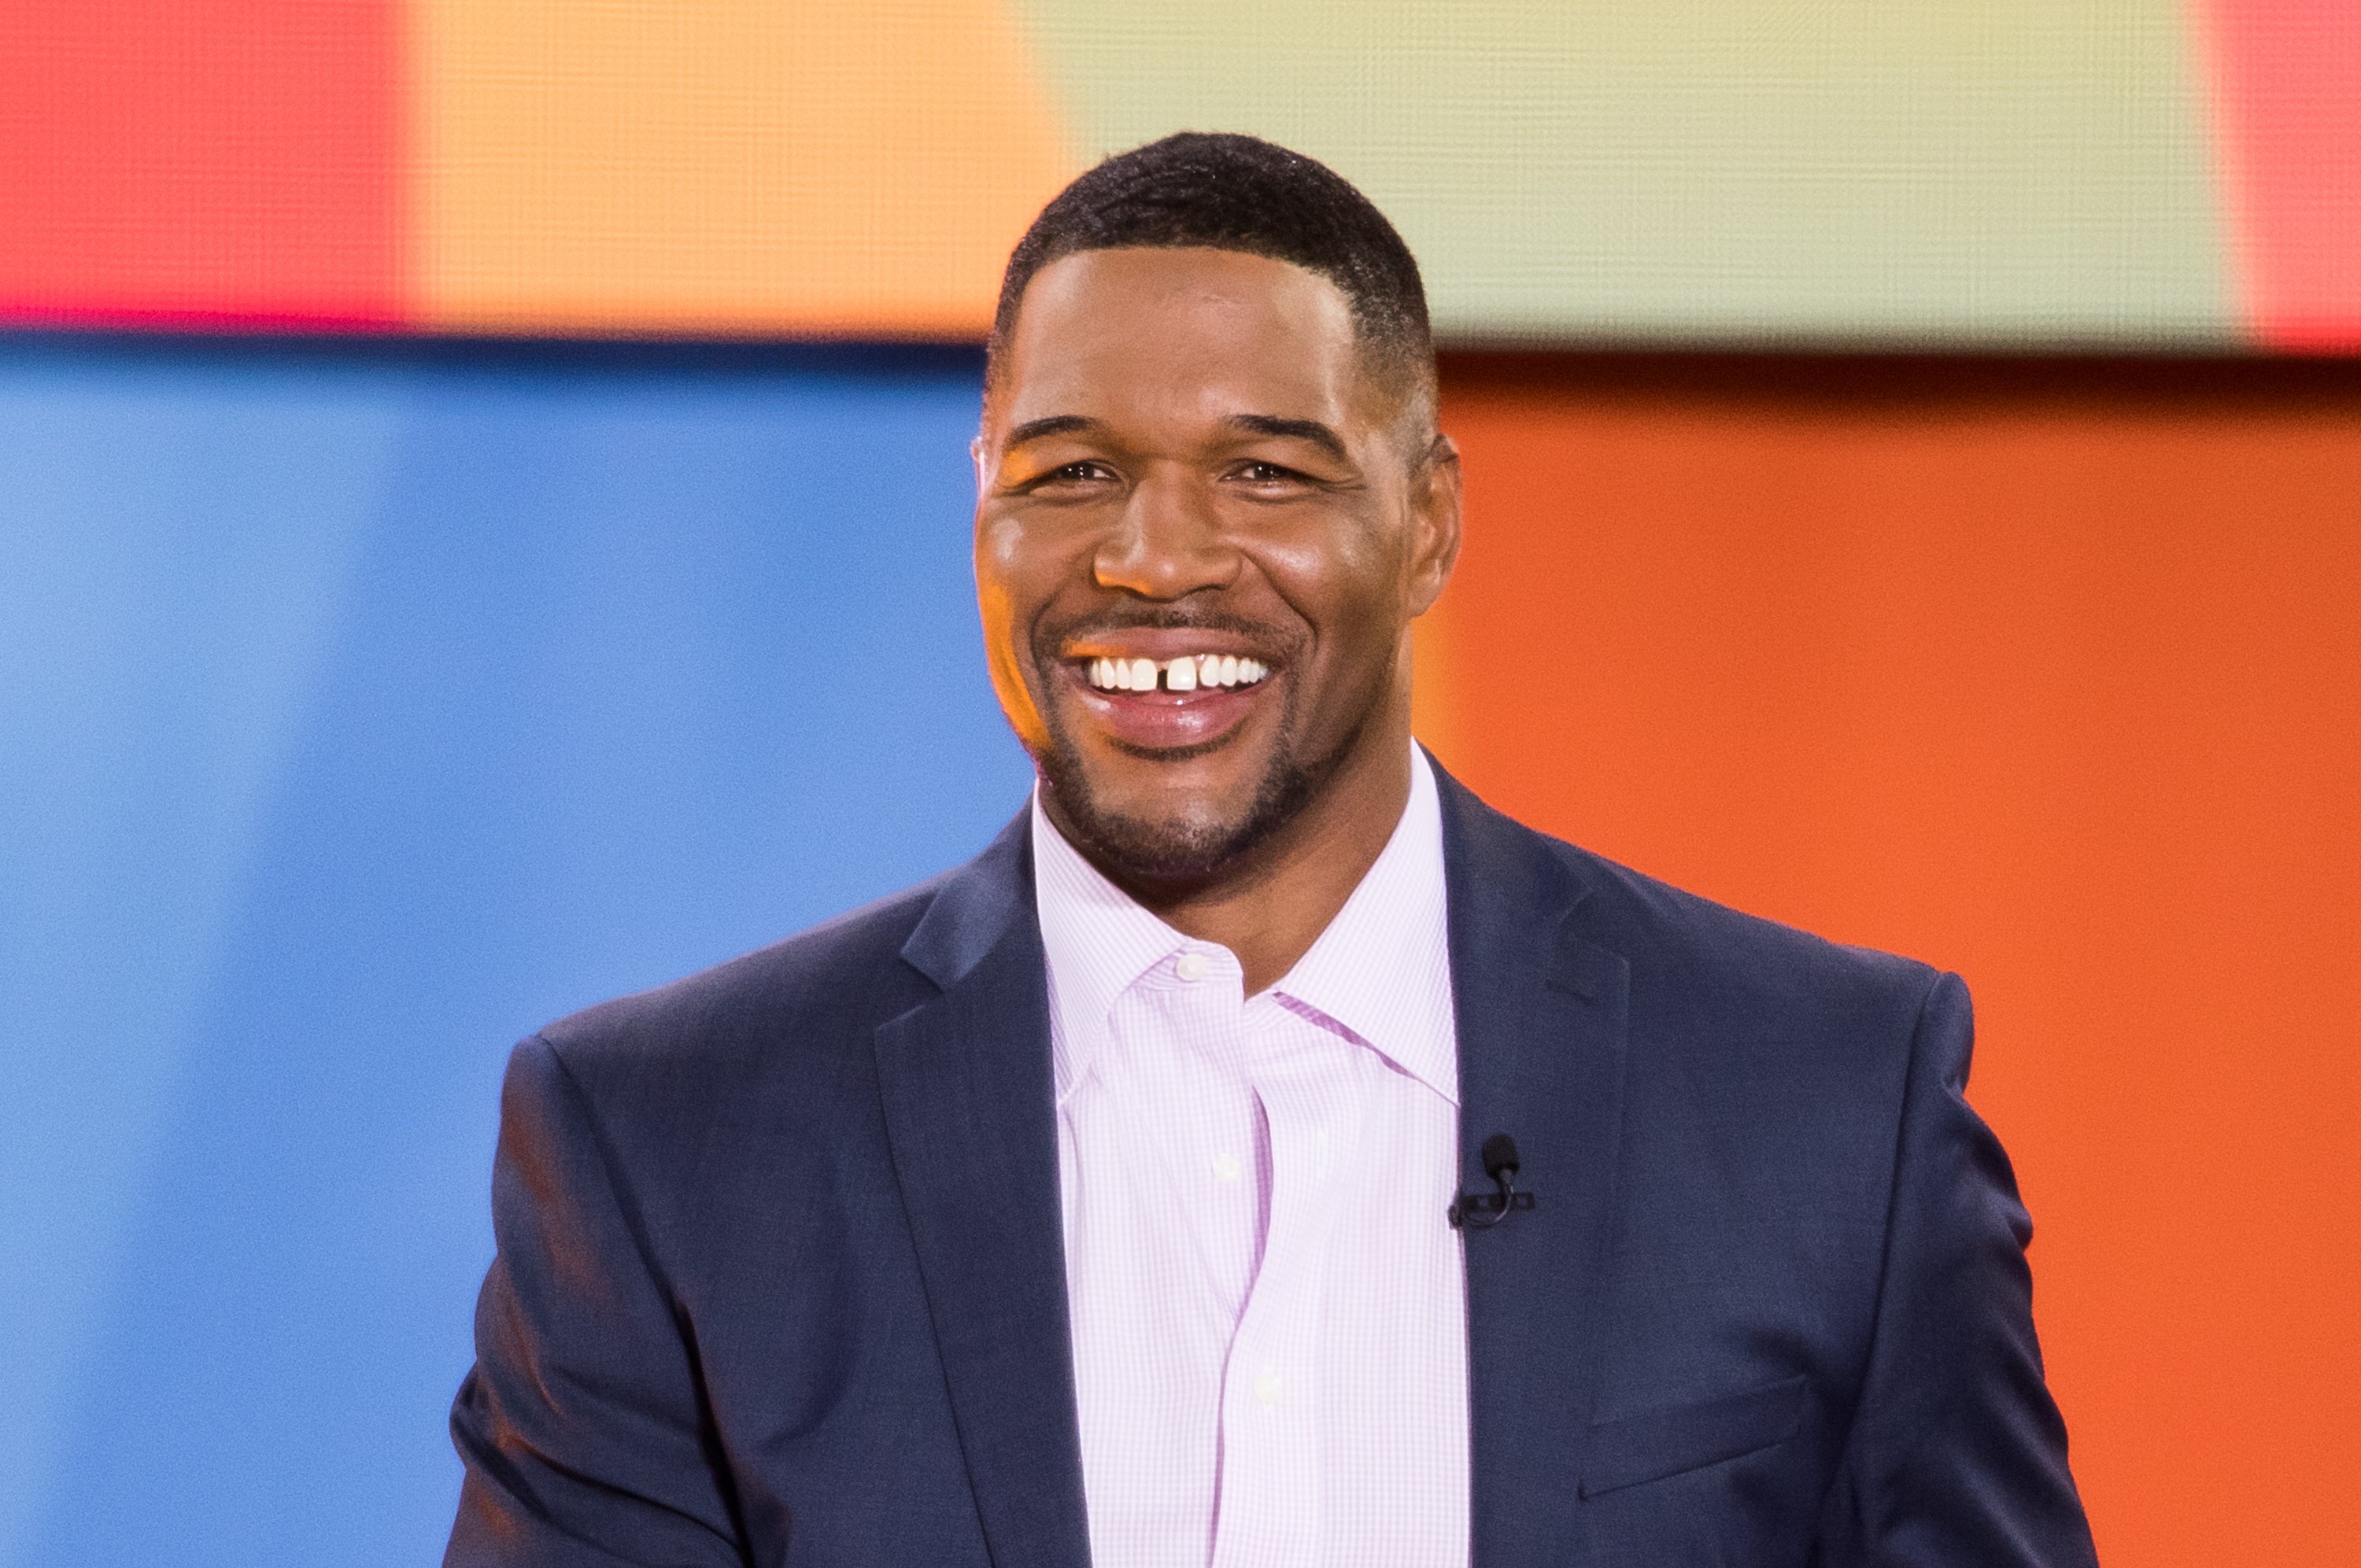  Michael Strahan during filming of ABC's "Good Morning America" at Rumsey Playfield, Central Park on July 6, 2018 in New York City. |Source: Getty Images